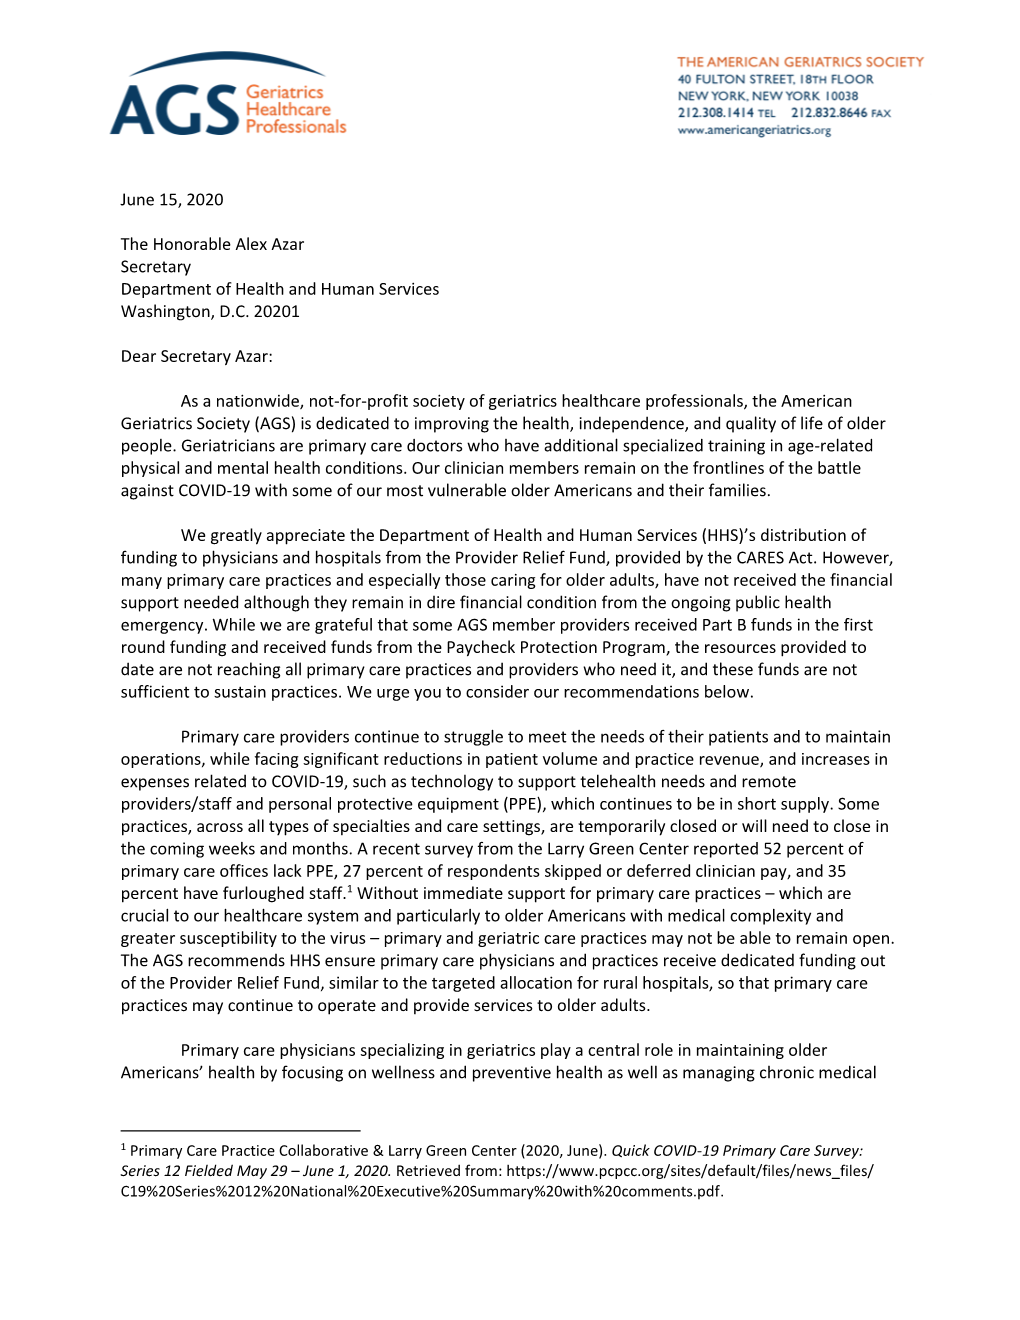 Letter to Health and Human Services Secretary Alex Azar on Funding To